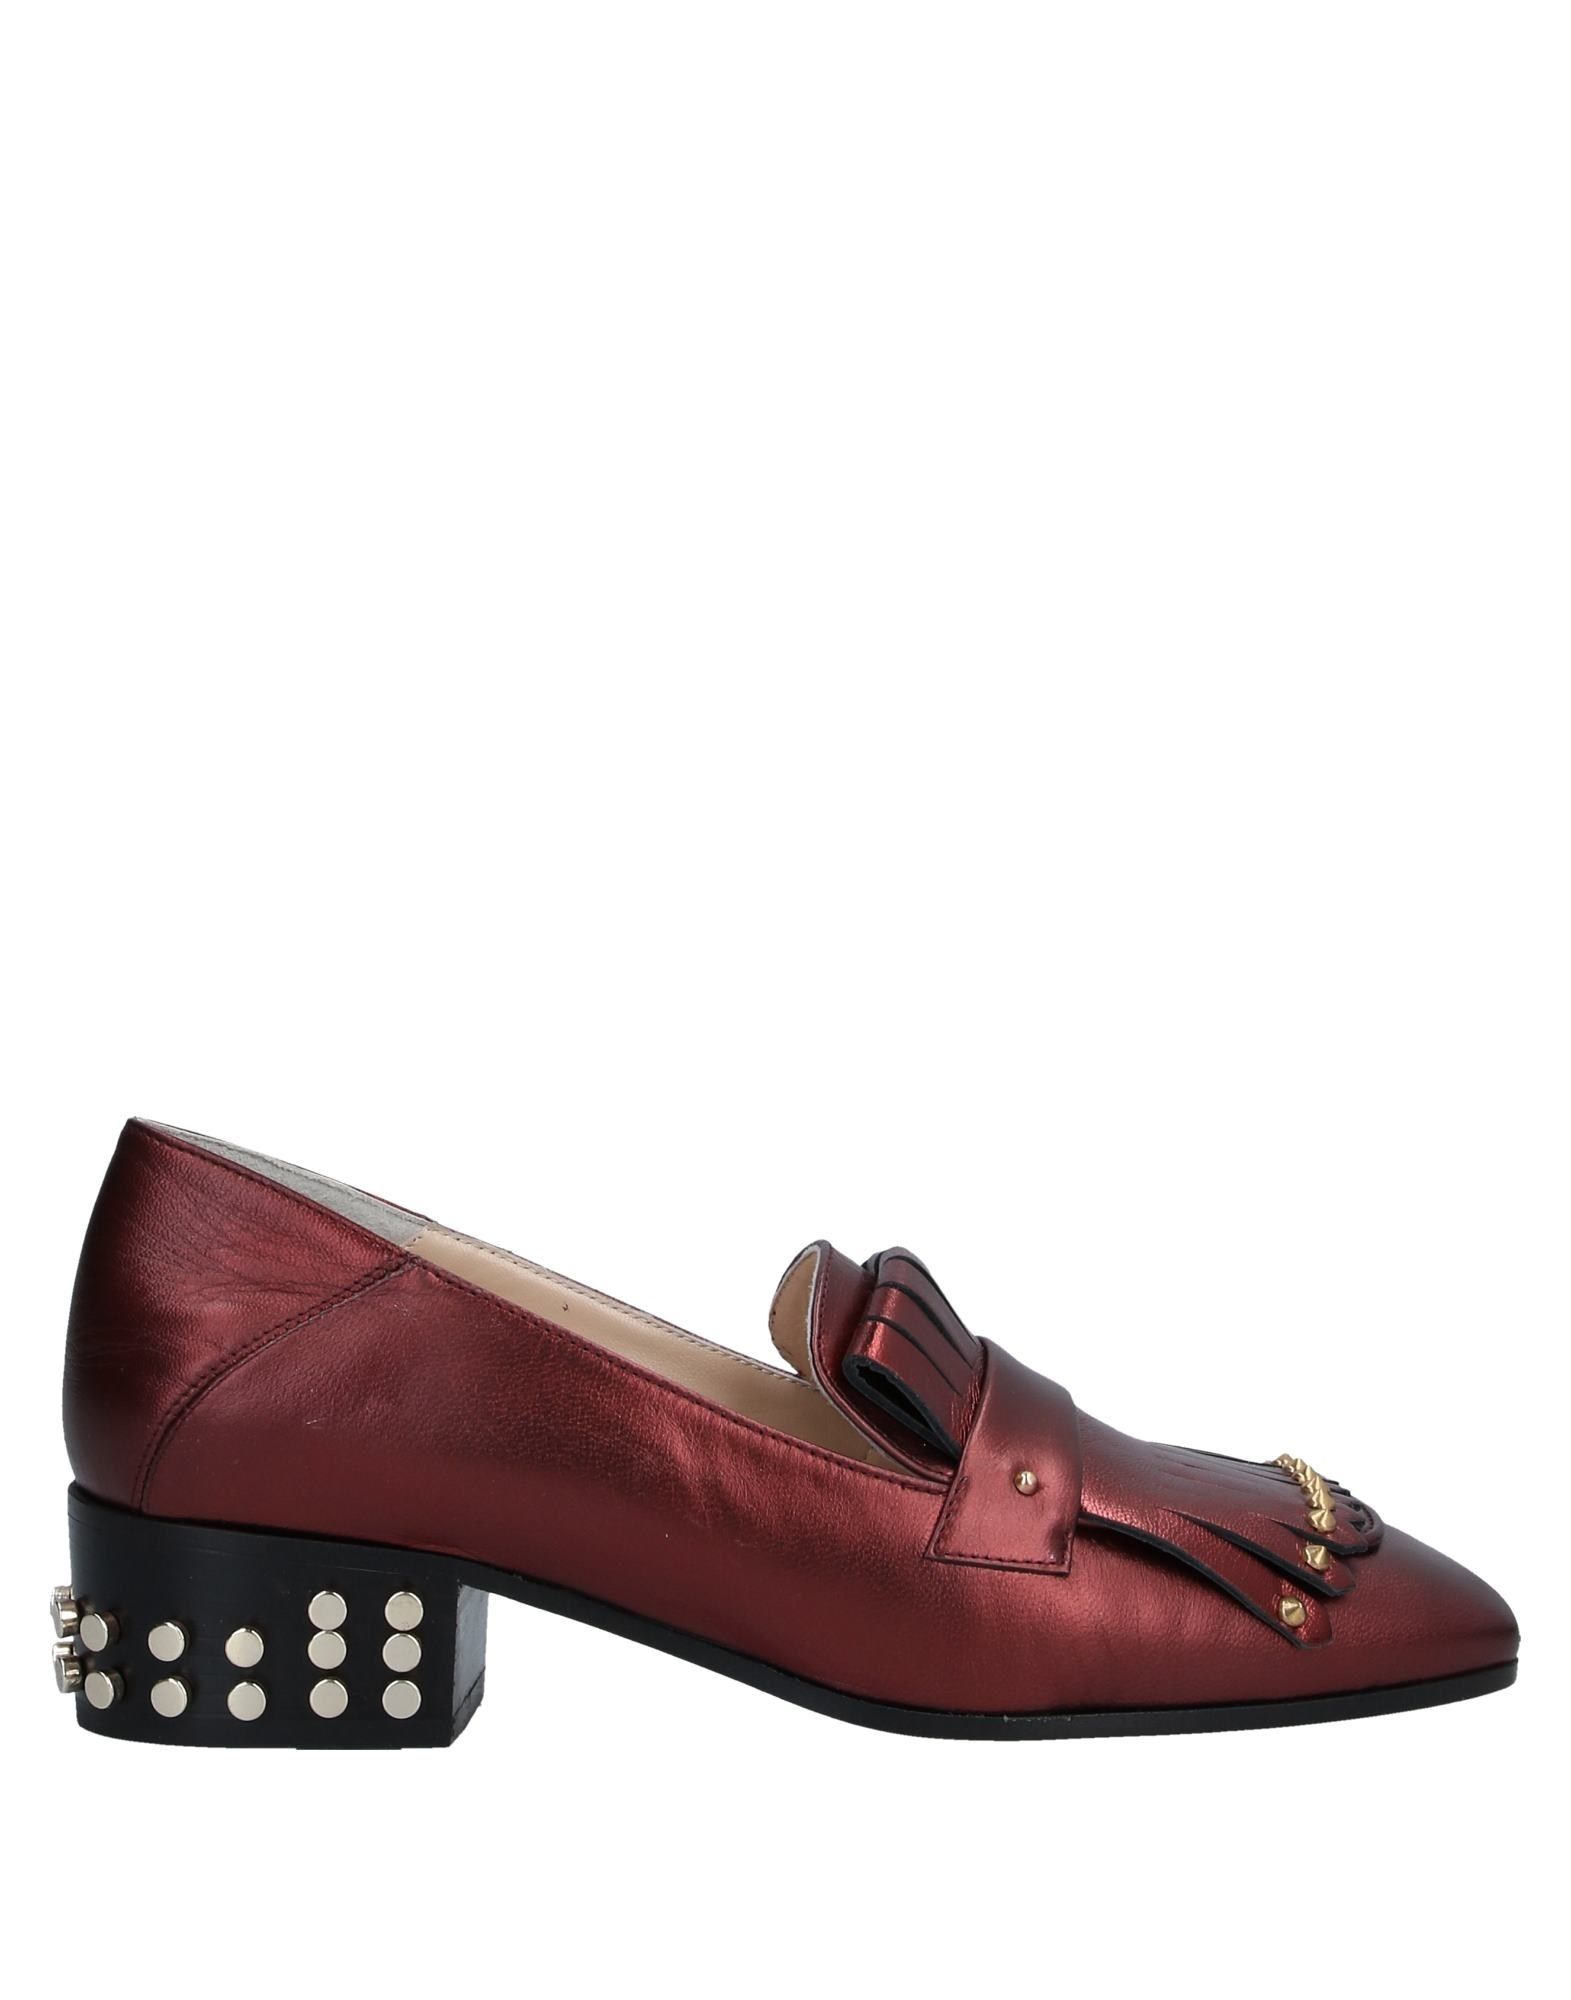 SPACE STYLE CONCEPT Loafers,11448359NI 11